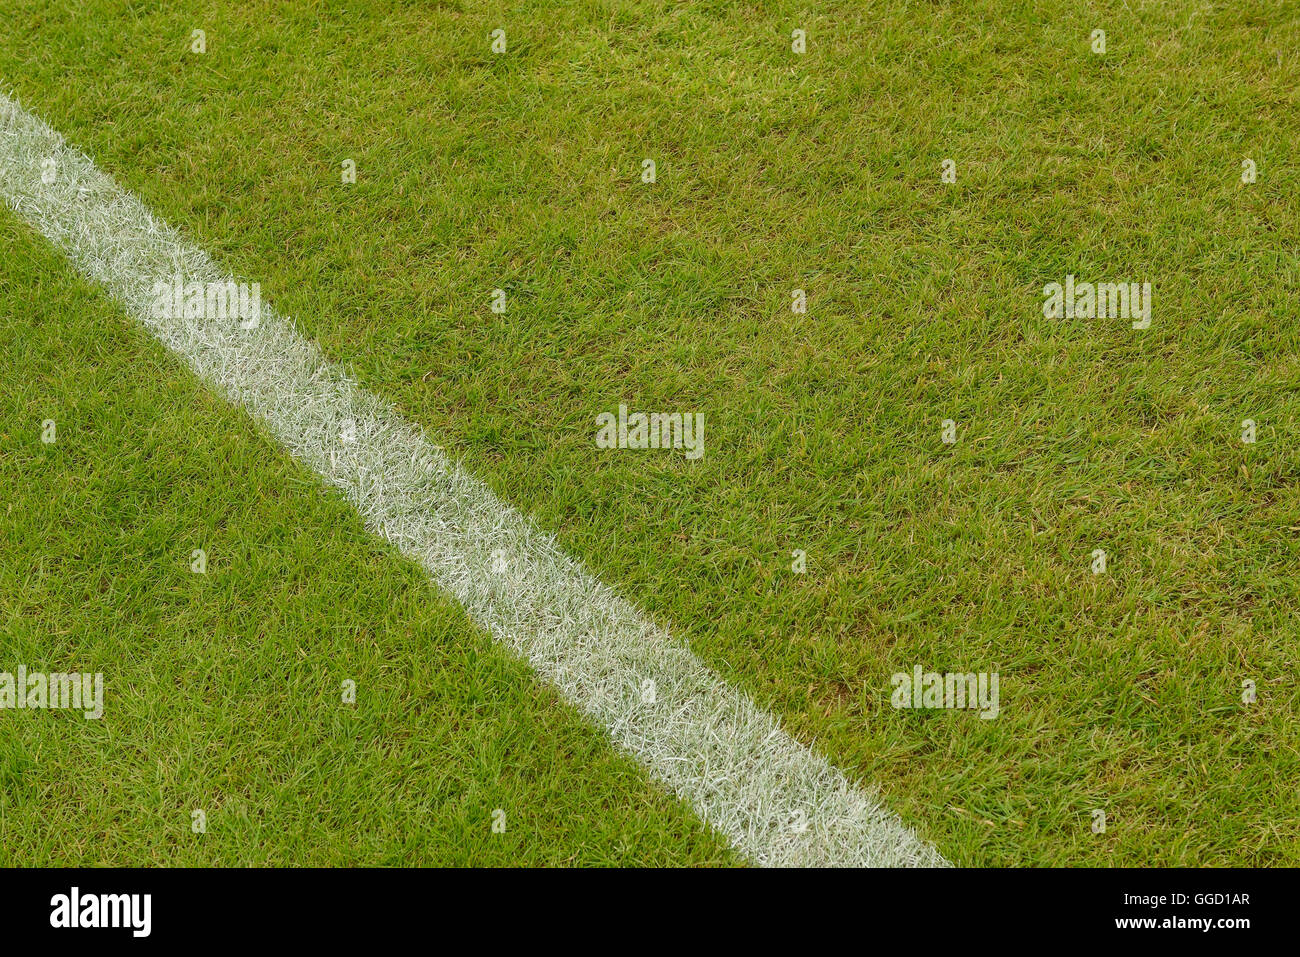 Grass on a sports field with a white painted line Stock Photo